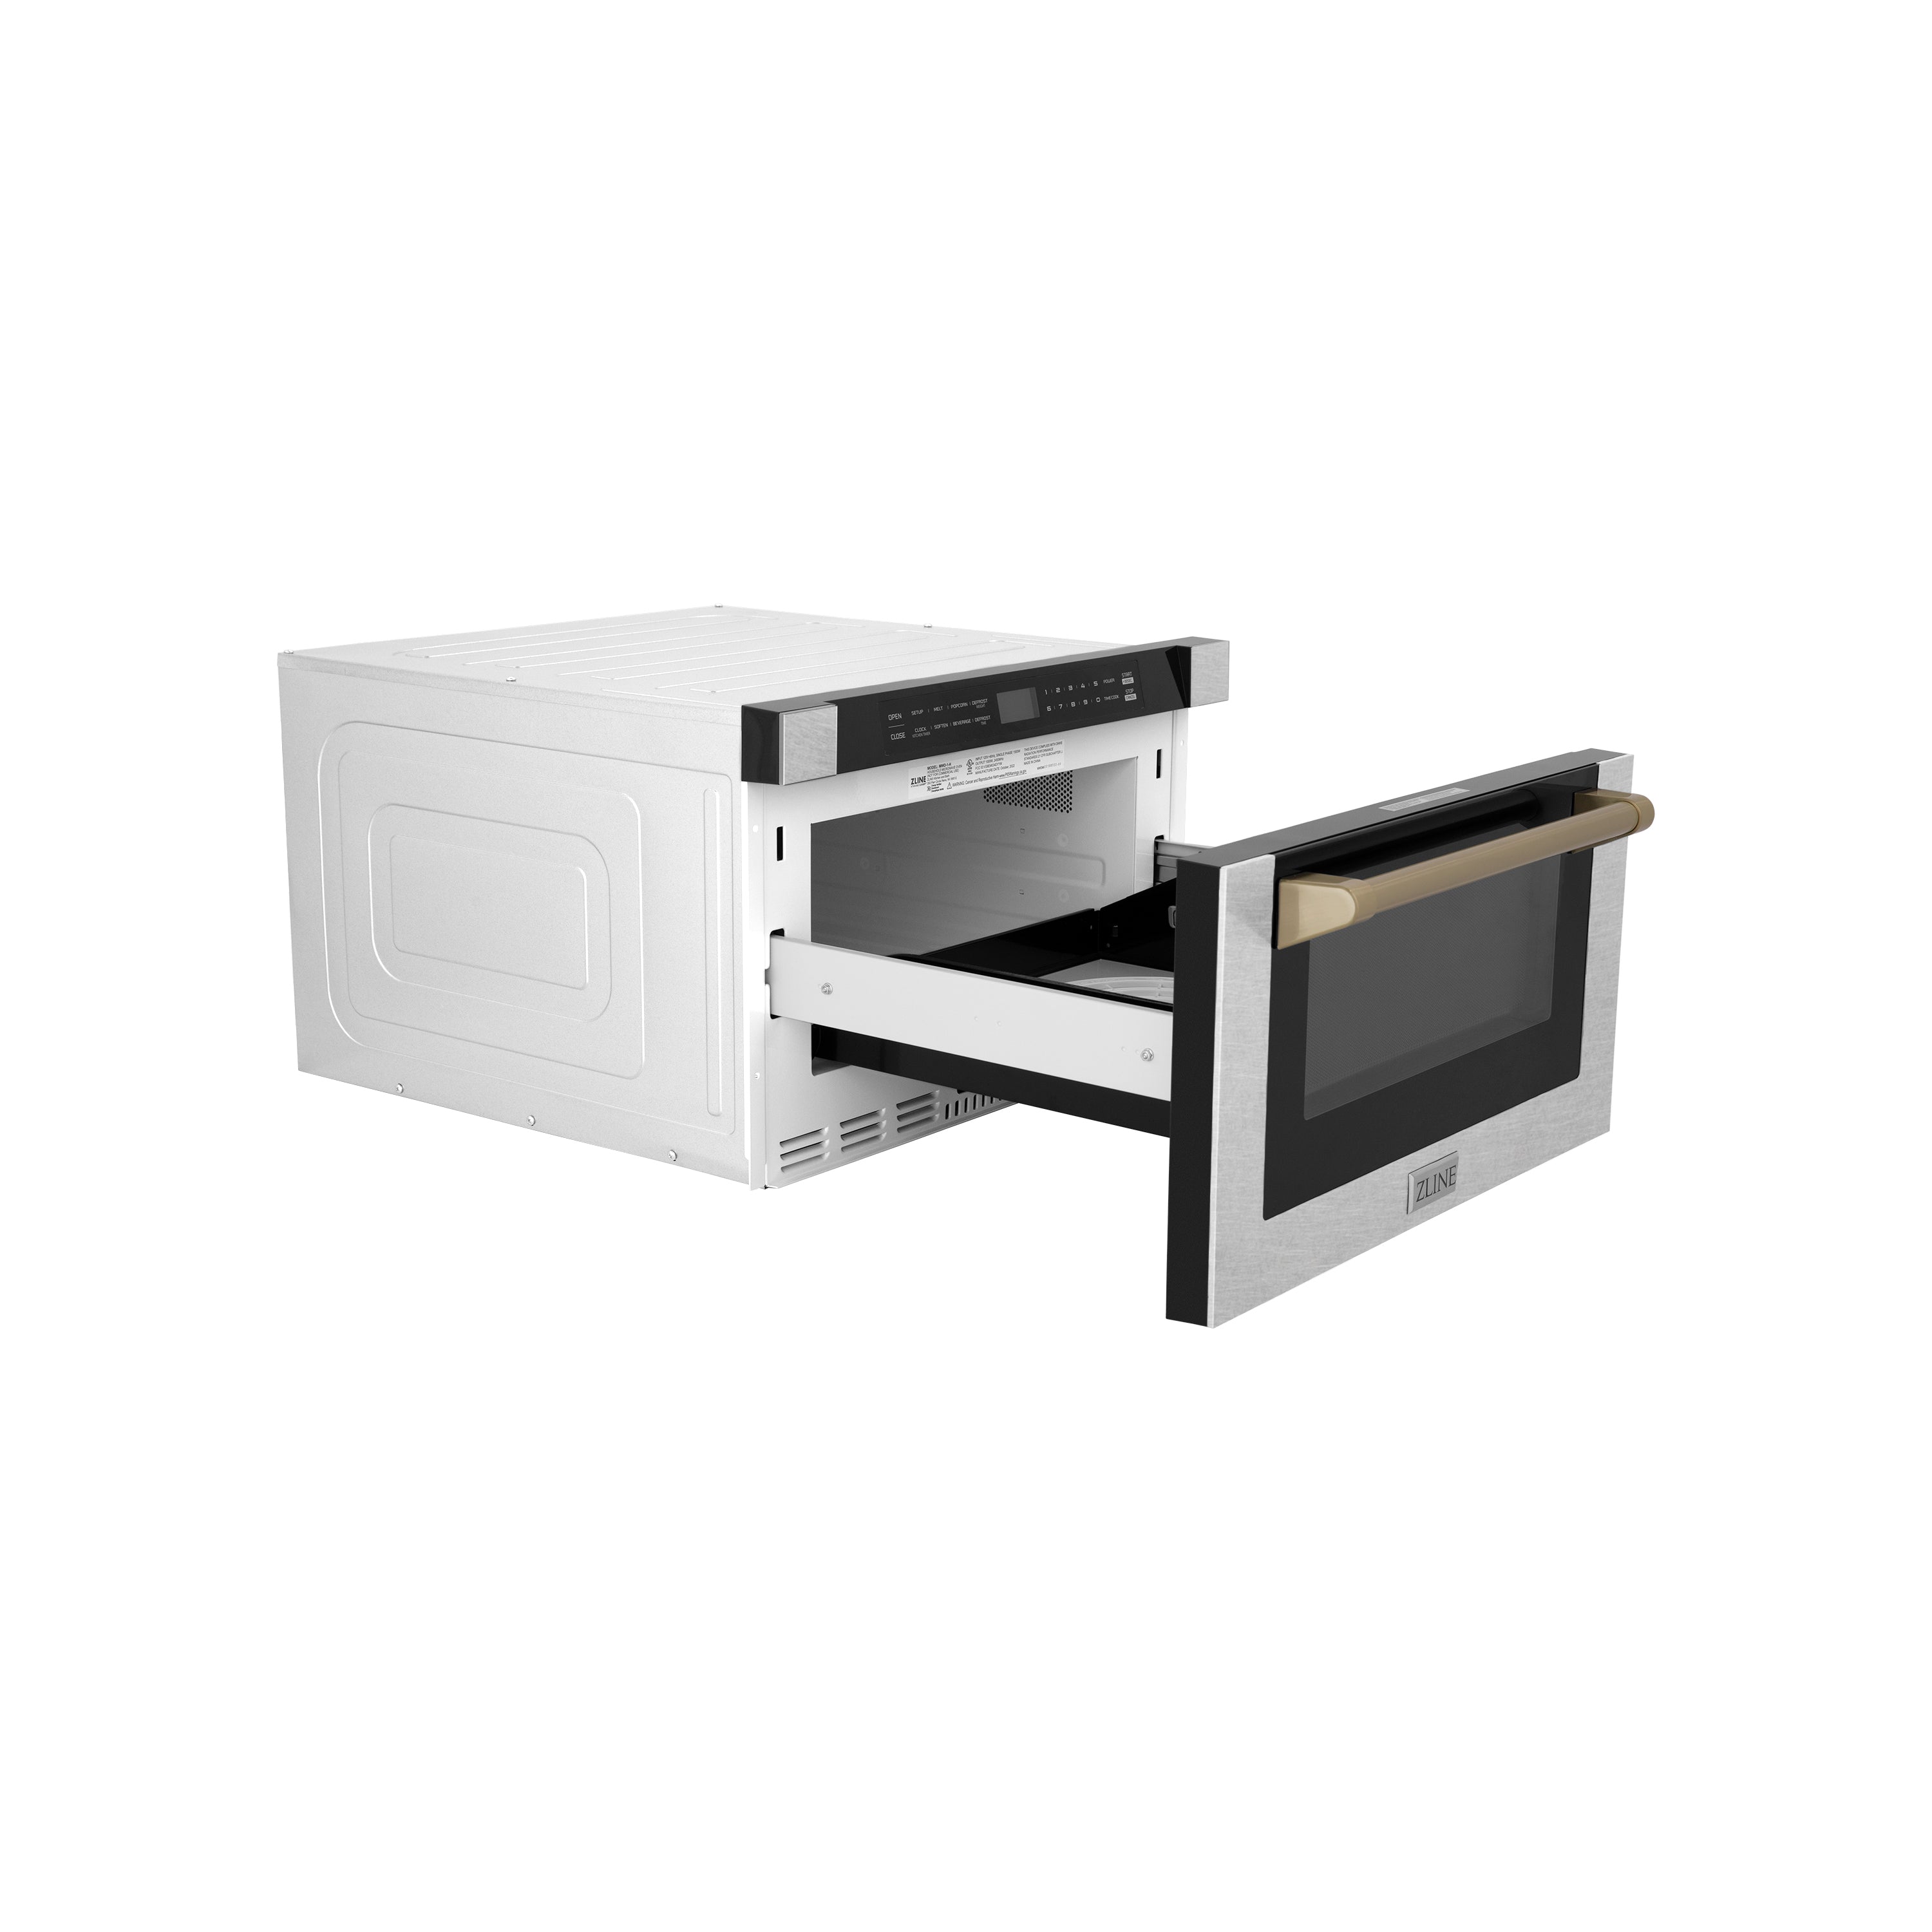 ZLINE Autograph Edition 24 in. Microwave in Fingerprint Resistant Stainless Steel with Traditional Handles and Champagne Bronze Accents (MWDZ-1-SS-H-CB) Opposite Side View Drawer Open